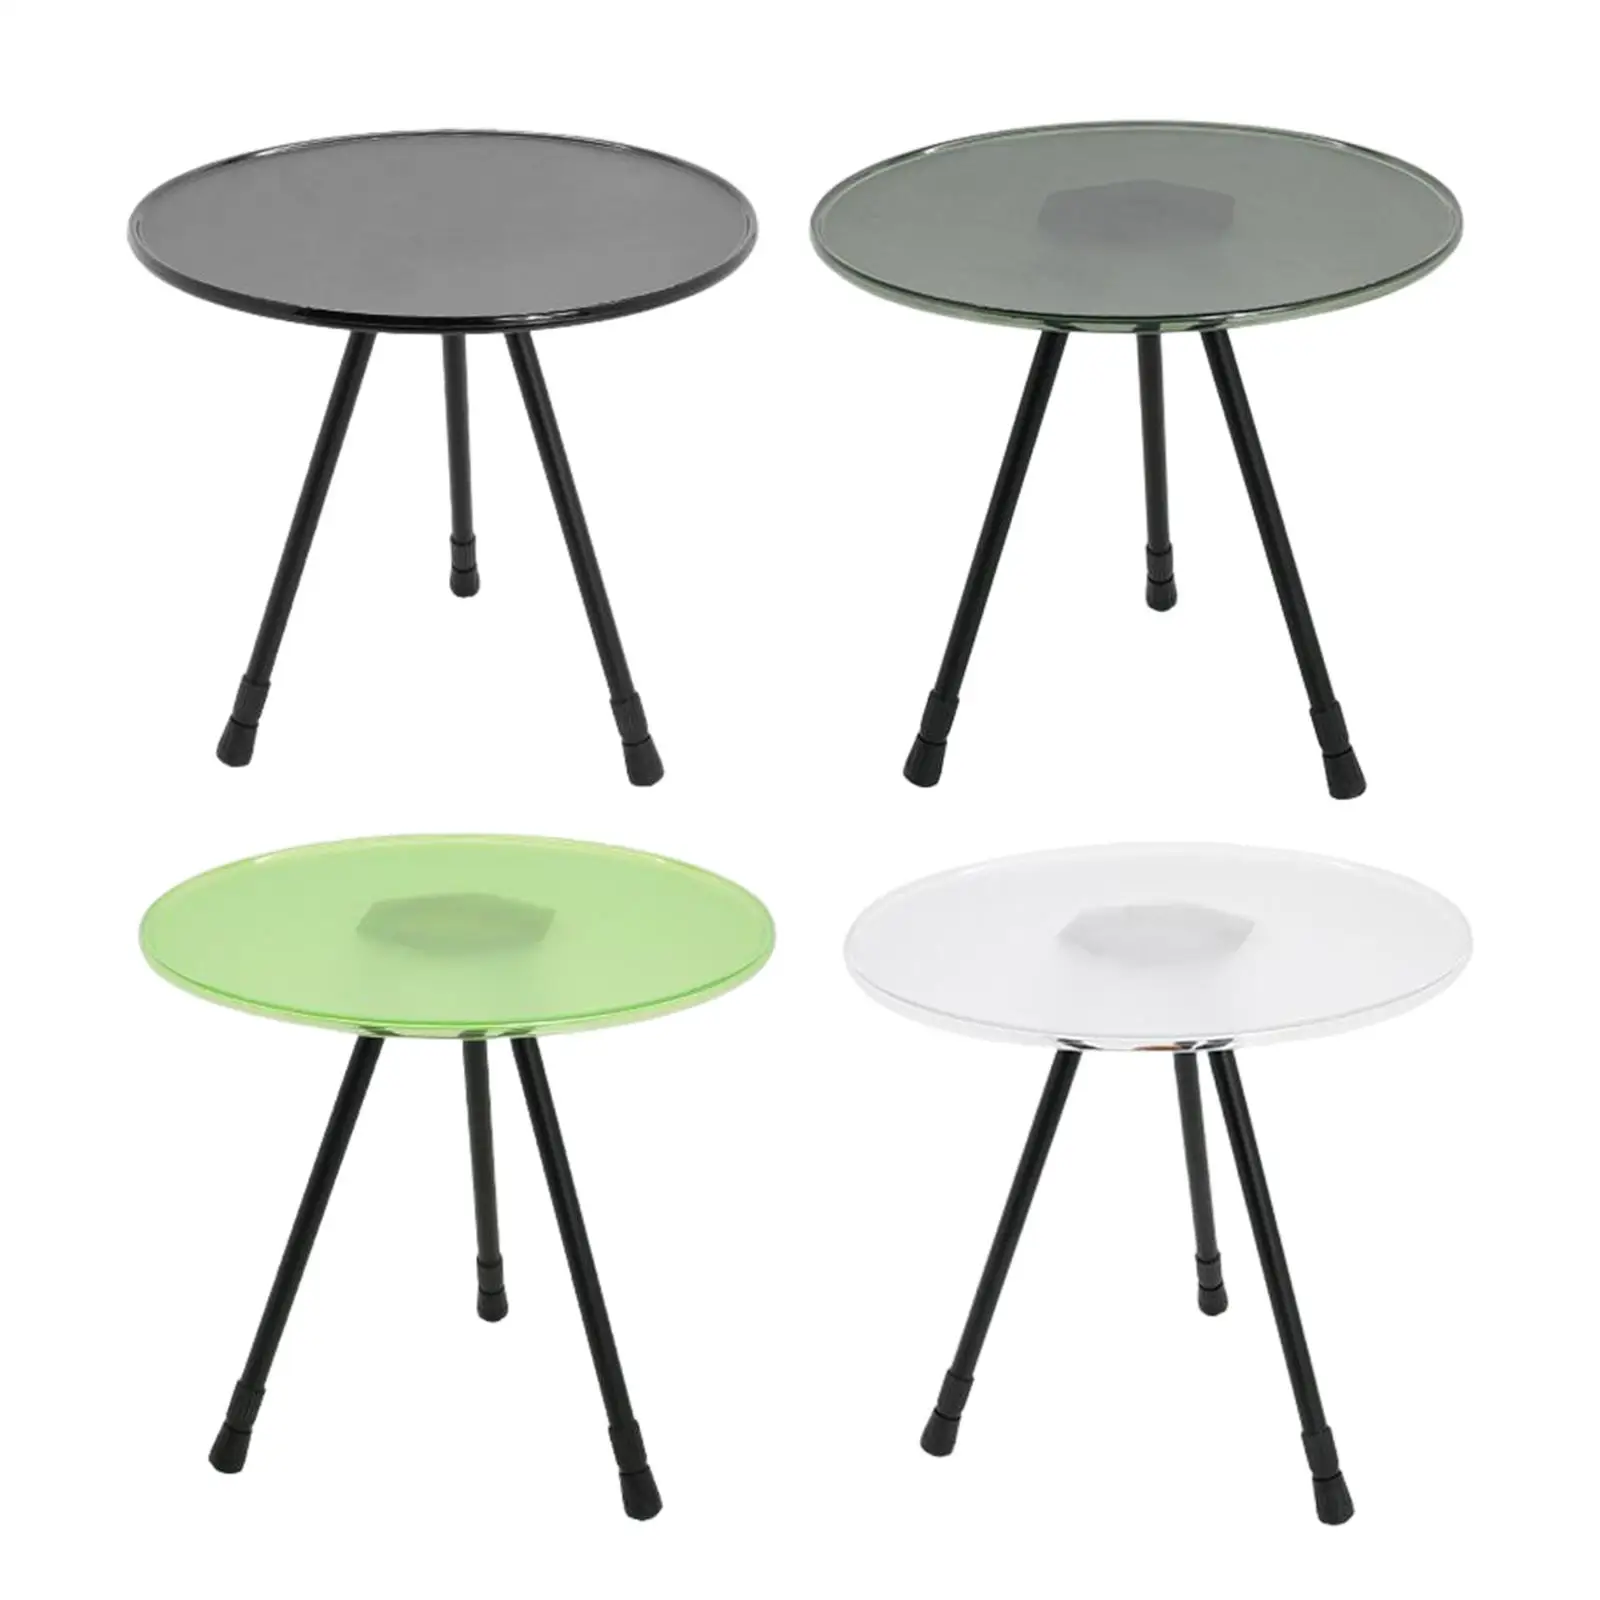 Portable Triangular Round Table Collapsible Height Adjustable Lifting Desk for Barbecue